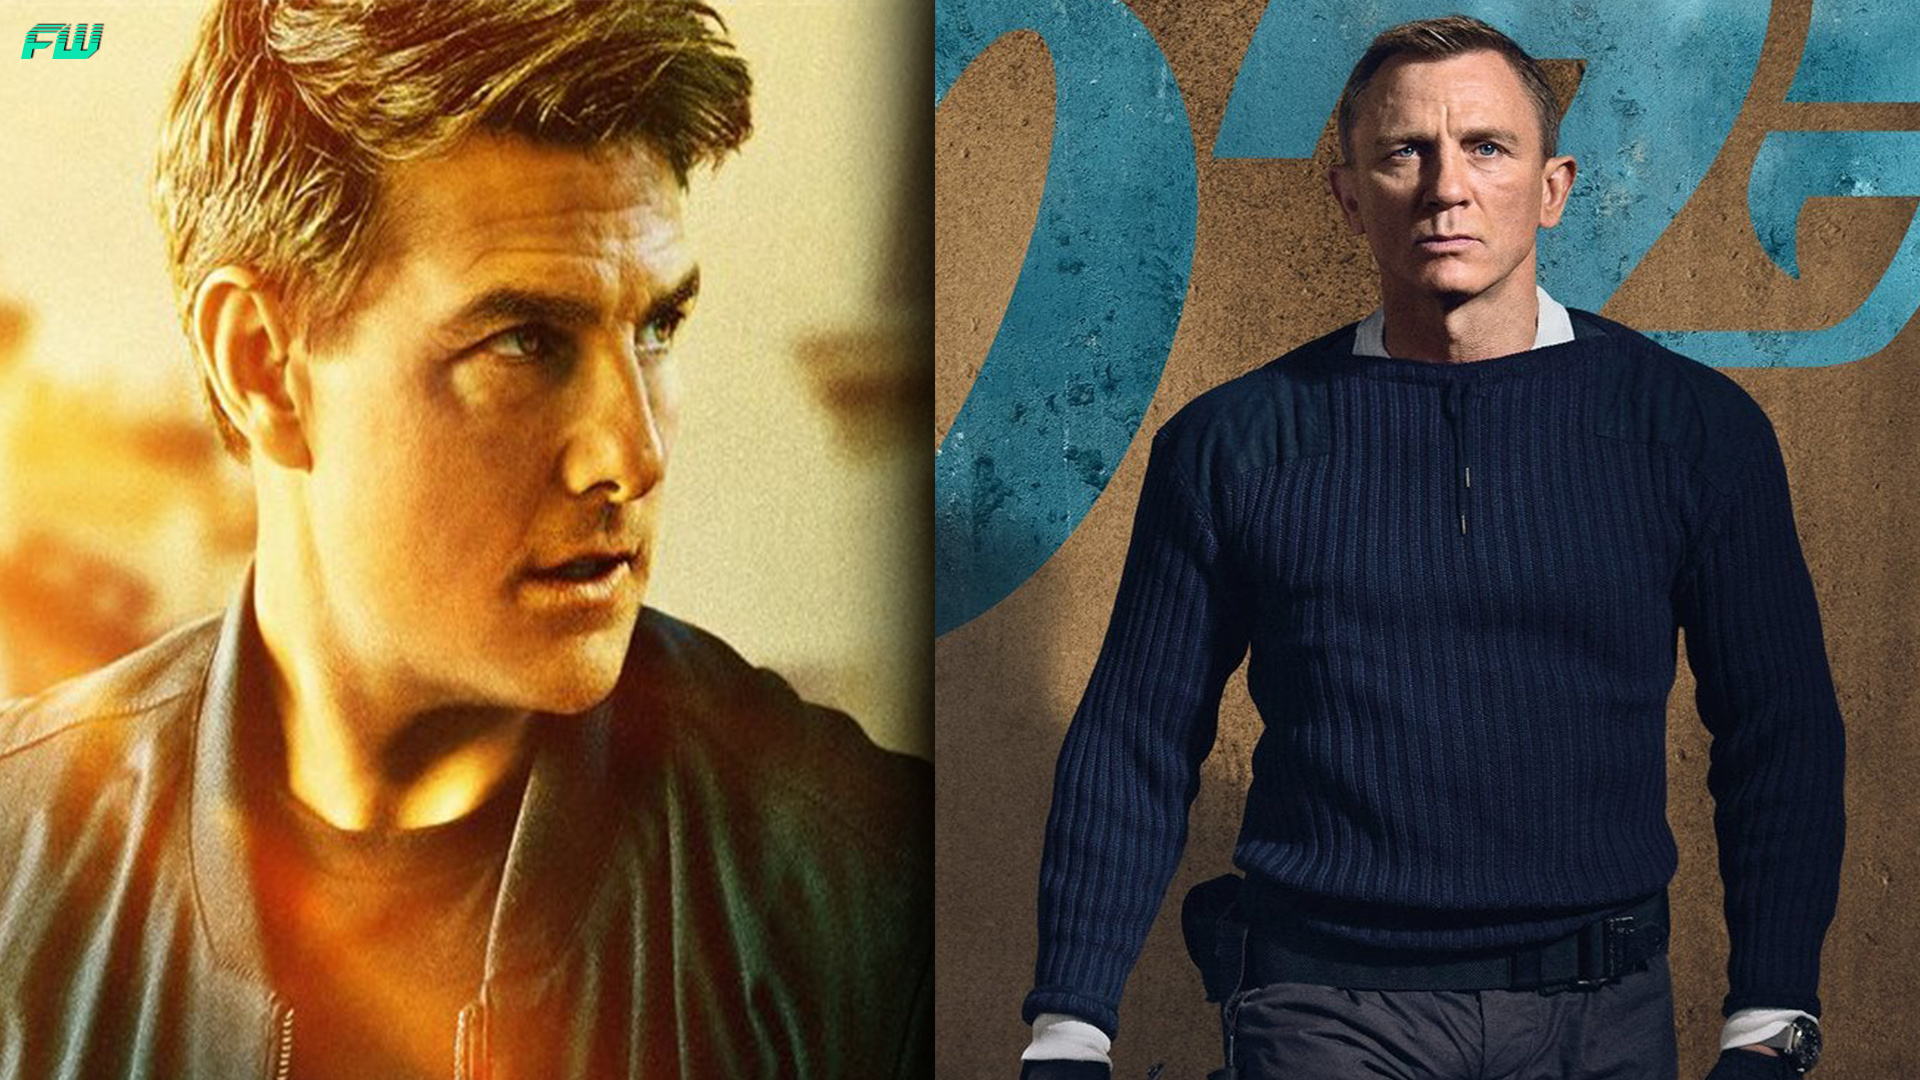 007 vs. Ethan Hunt: 5 Reasons Bond Movies Are Better (& 5 Why MI Movies ...